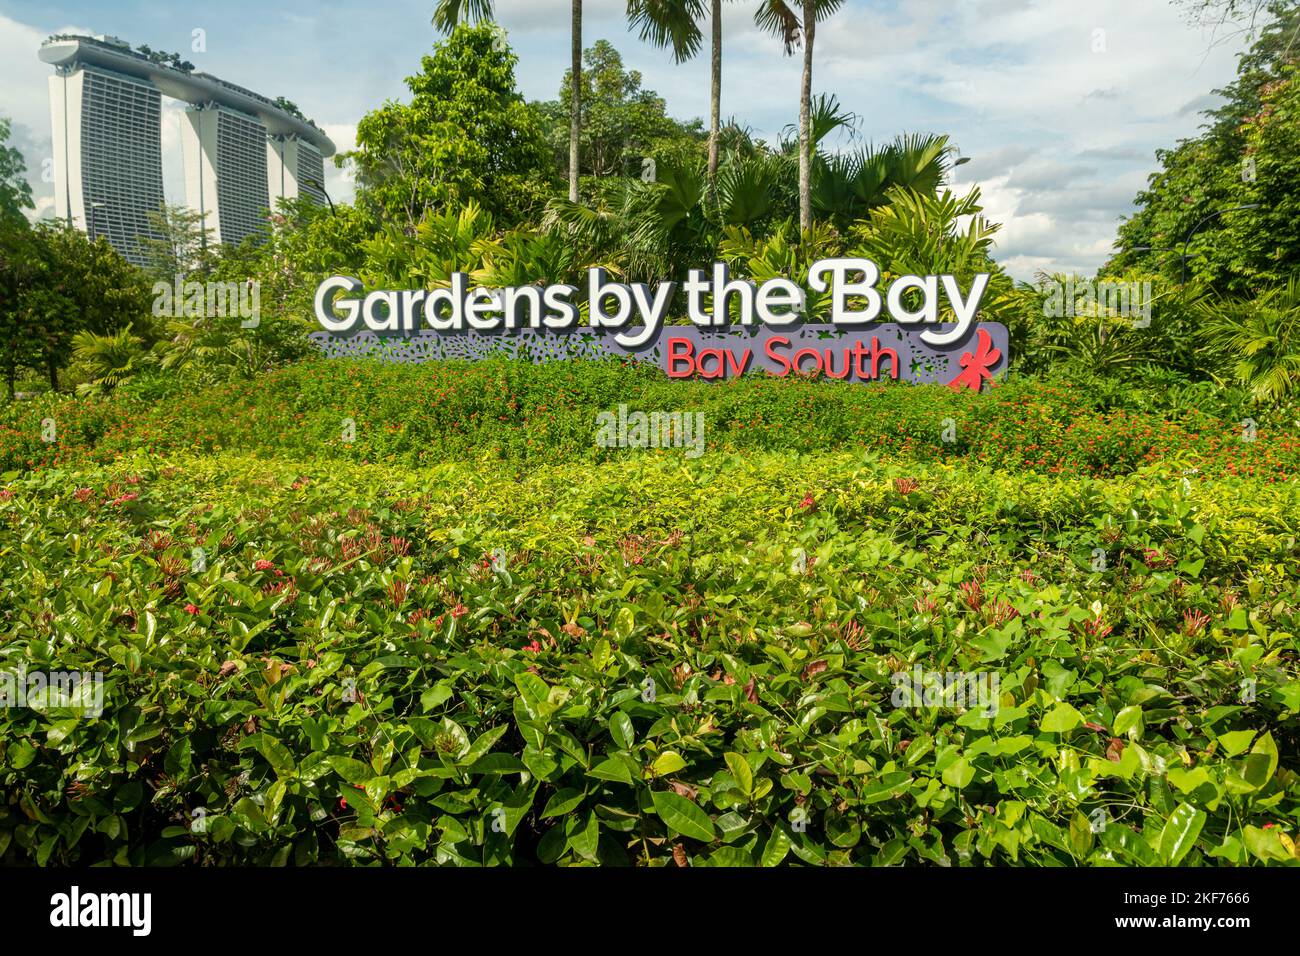 Super trees at Gardens by the Bay, Singapore. The tree-like structures are fitted with environmental technologies that mimic the ecological function o Stock Photo